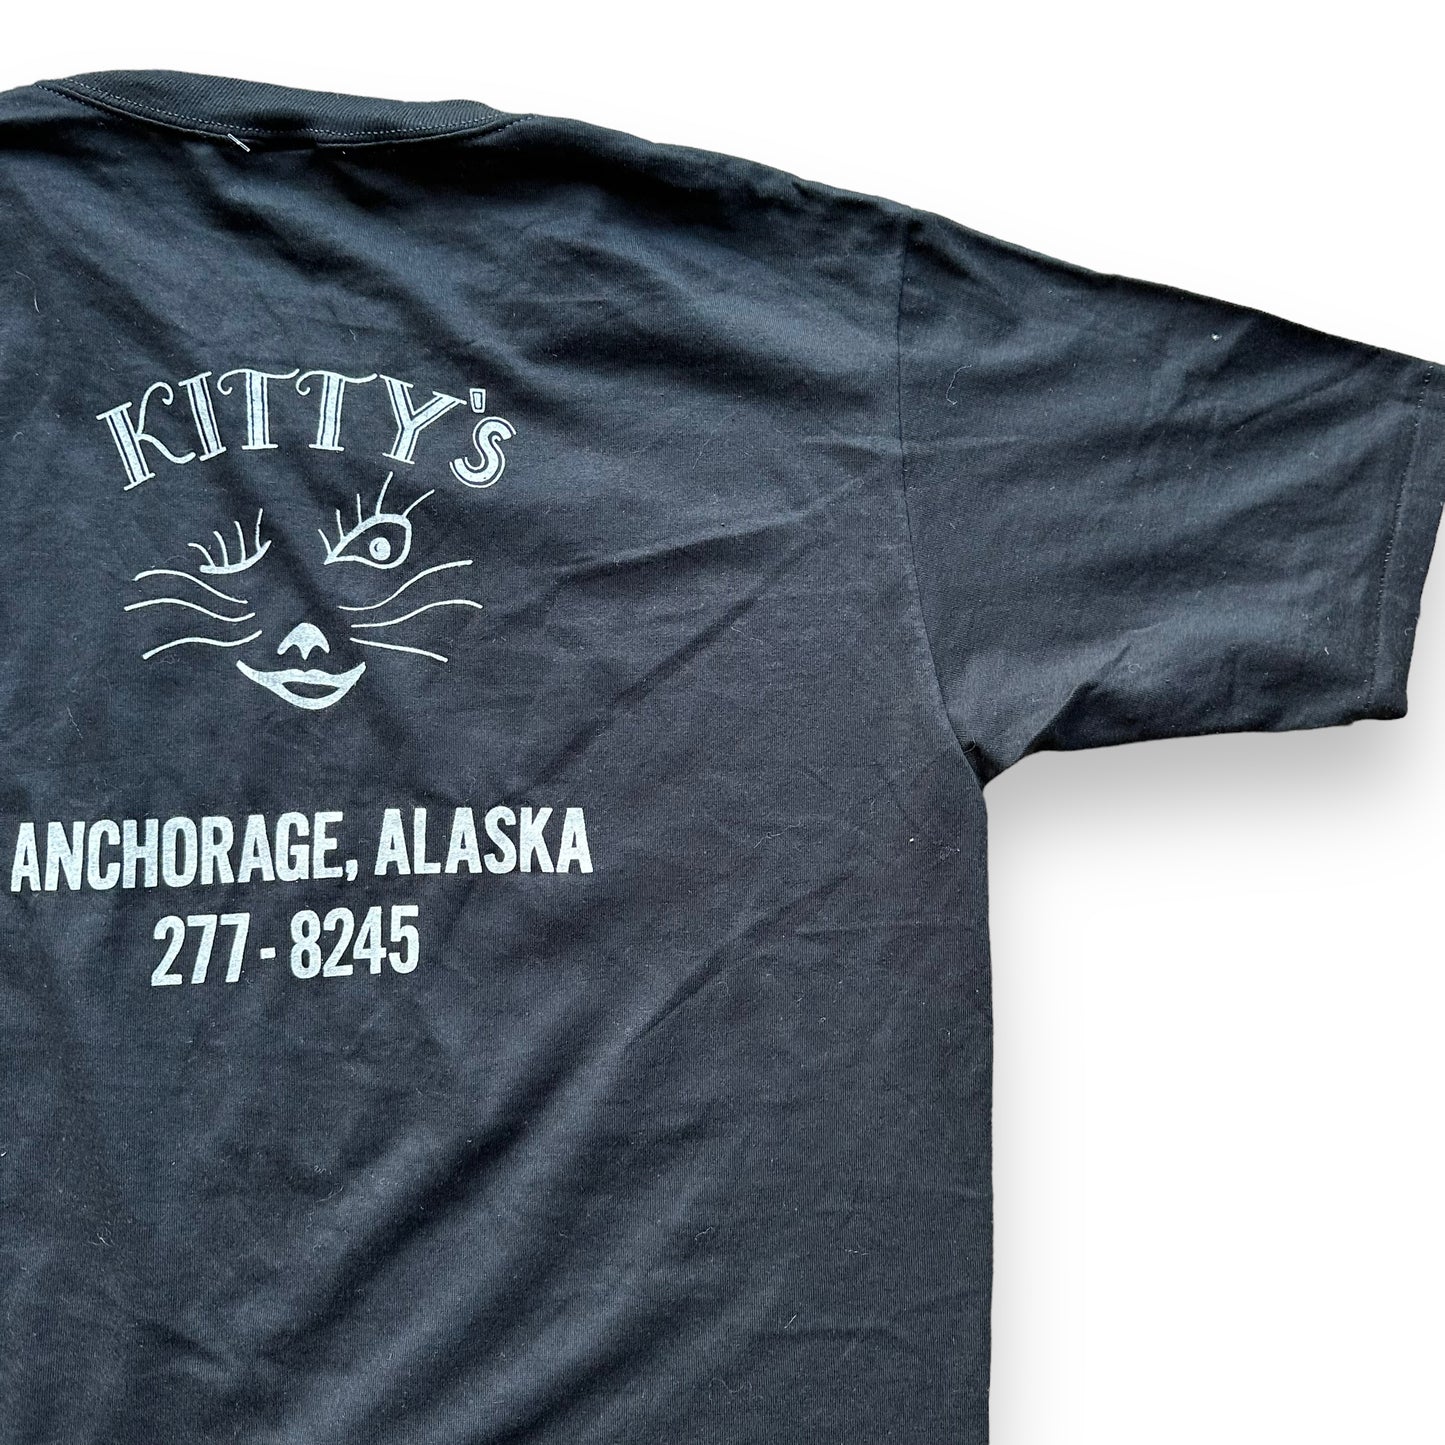 Right Rear View of Vintage Kitty's Anchorage Alaska Tee SZ XL | Vintage T-Shirts Seattle | Barn Owl Vintage Tees Seattle